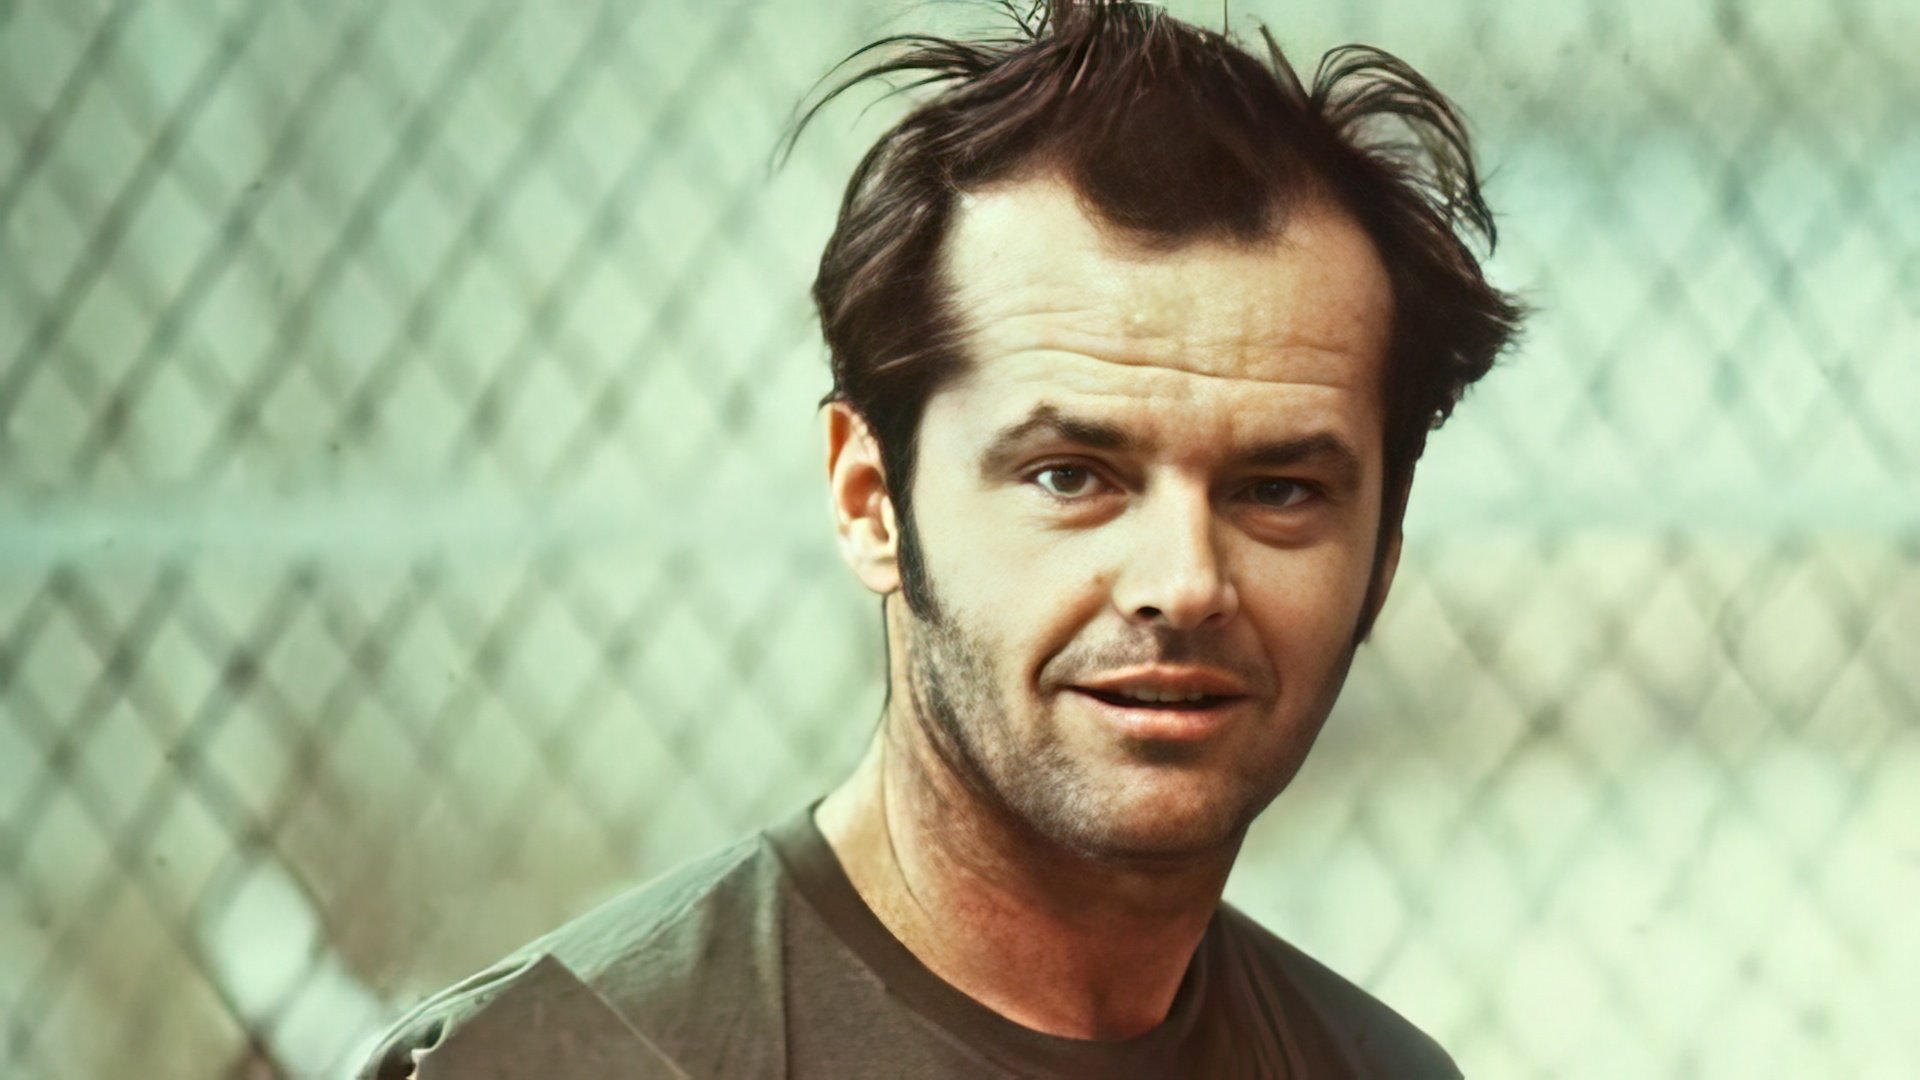 A scene from “One Flew Over the Cuckoo's Nest”